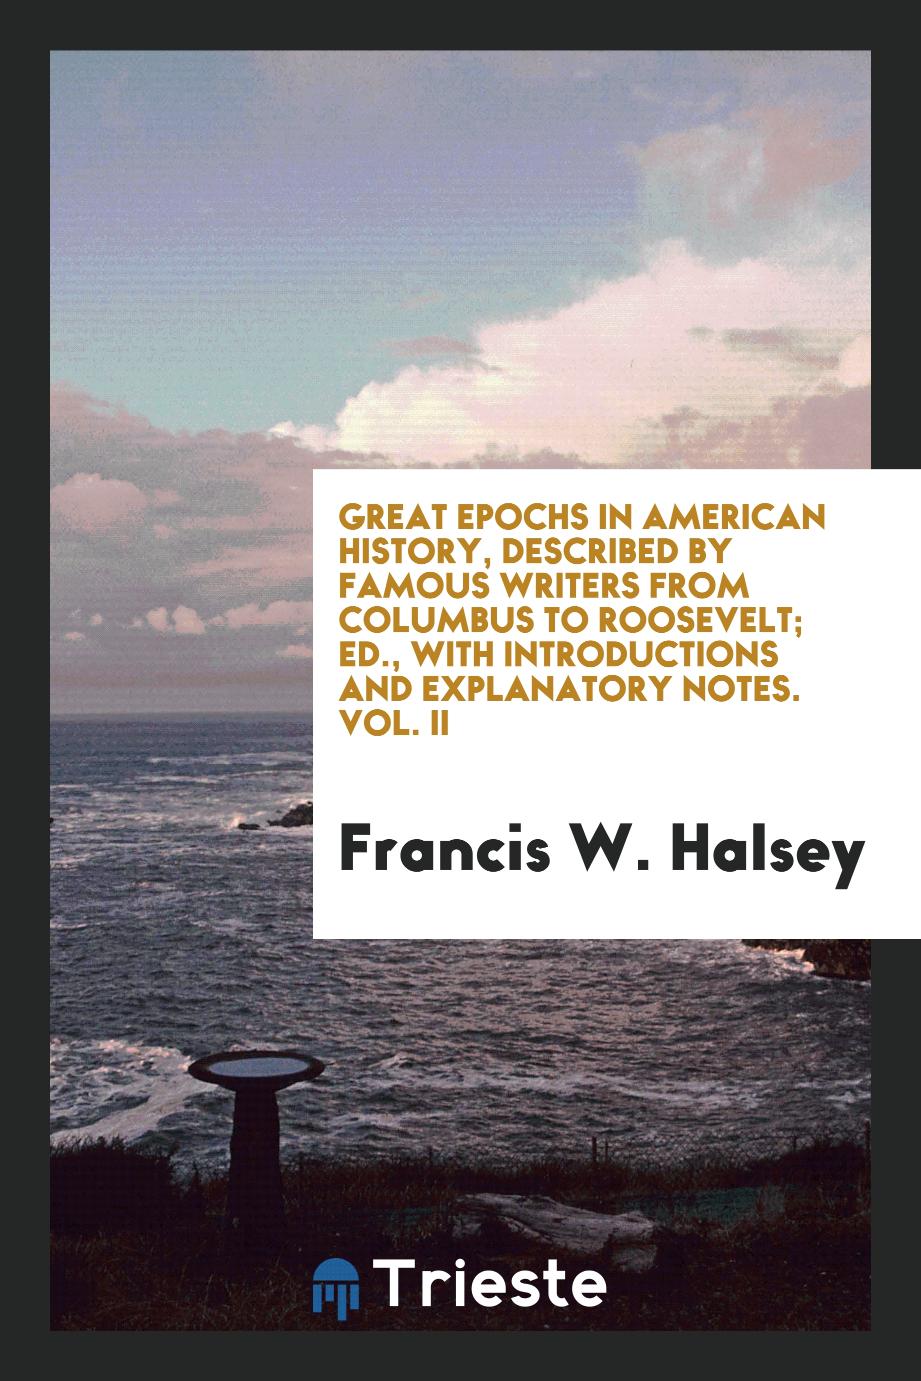 Great epochs in American history, described by famous writers from Columbus to Roosevelt; ed., with introductions and explanatory notes. Vol. II